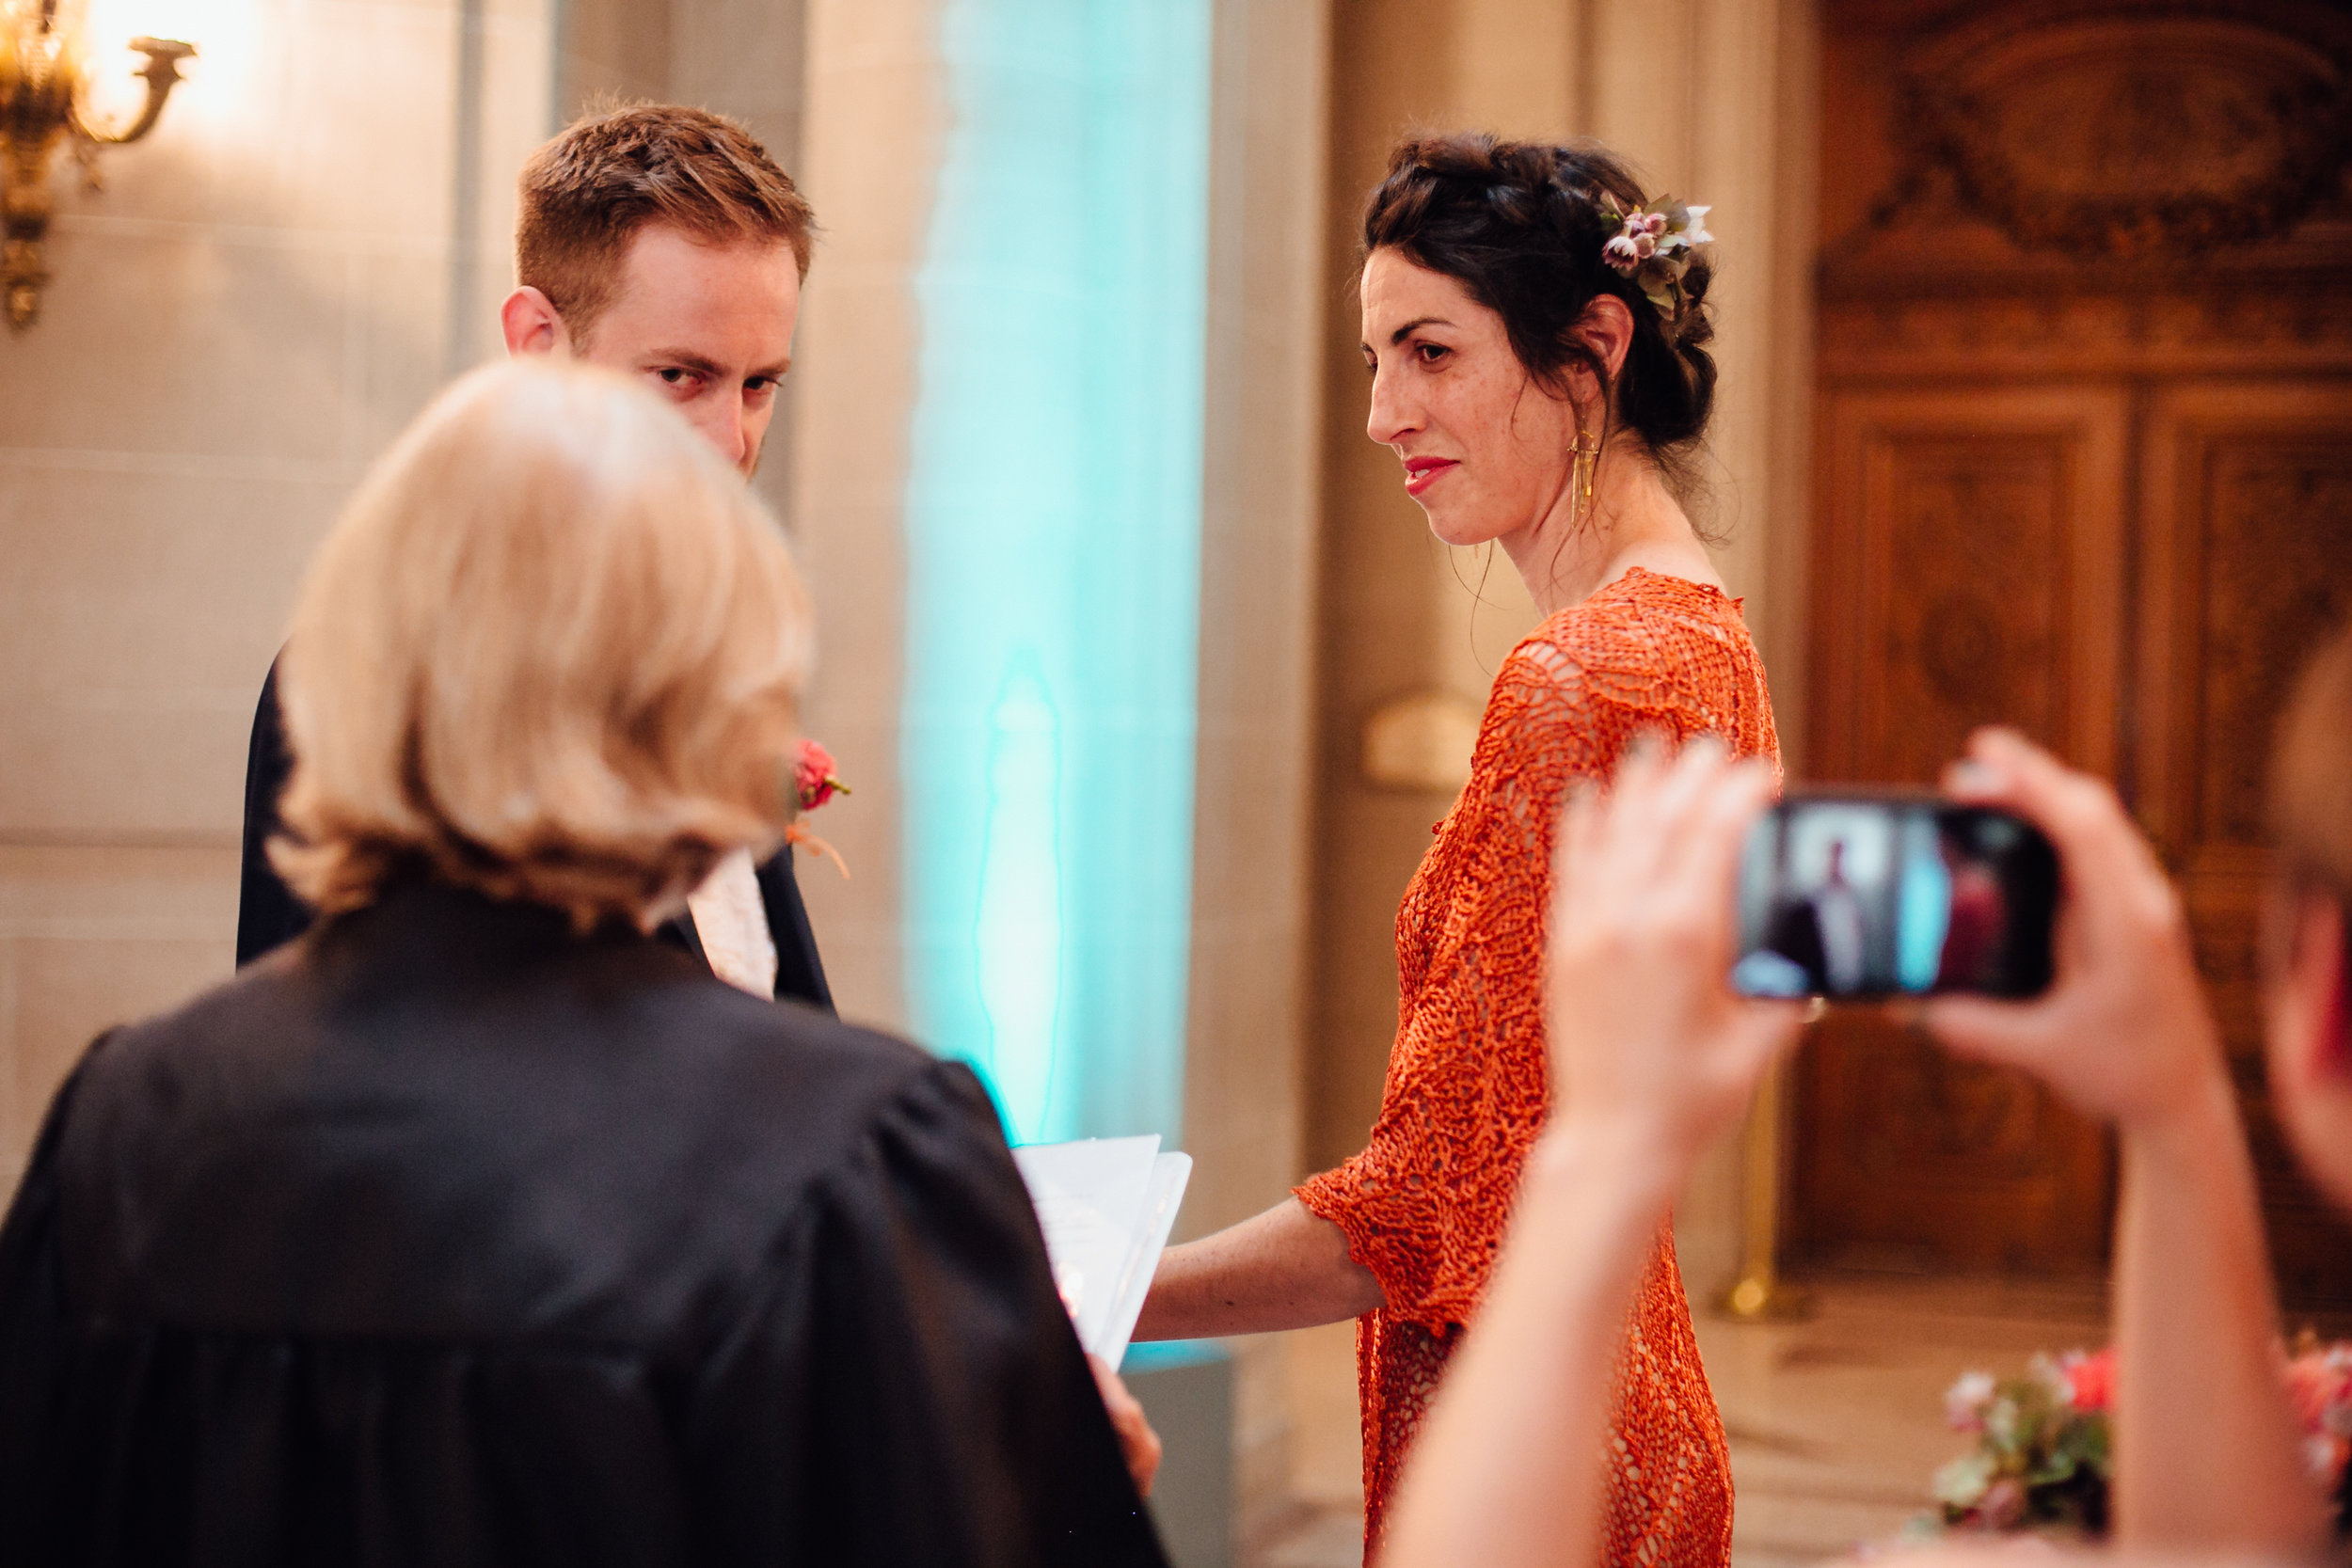  An intimate San Francisco City Hall ceremony, featuring an alternative bride in a bright orange dress. 